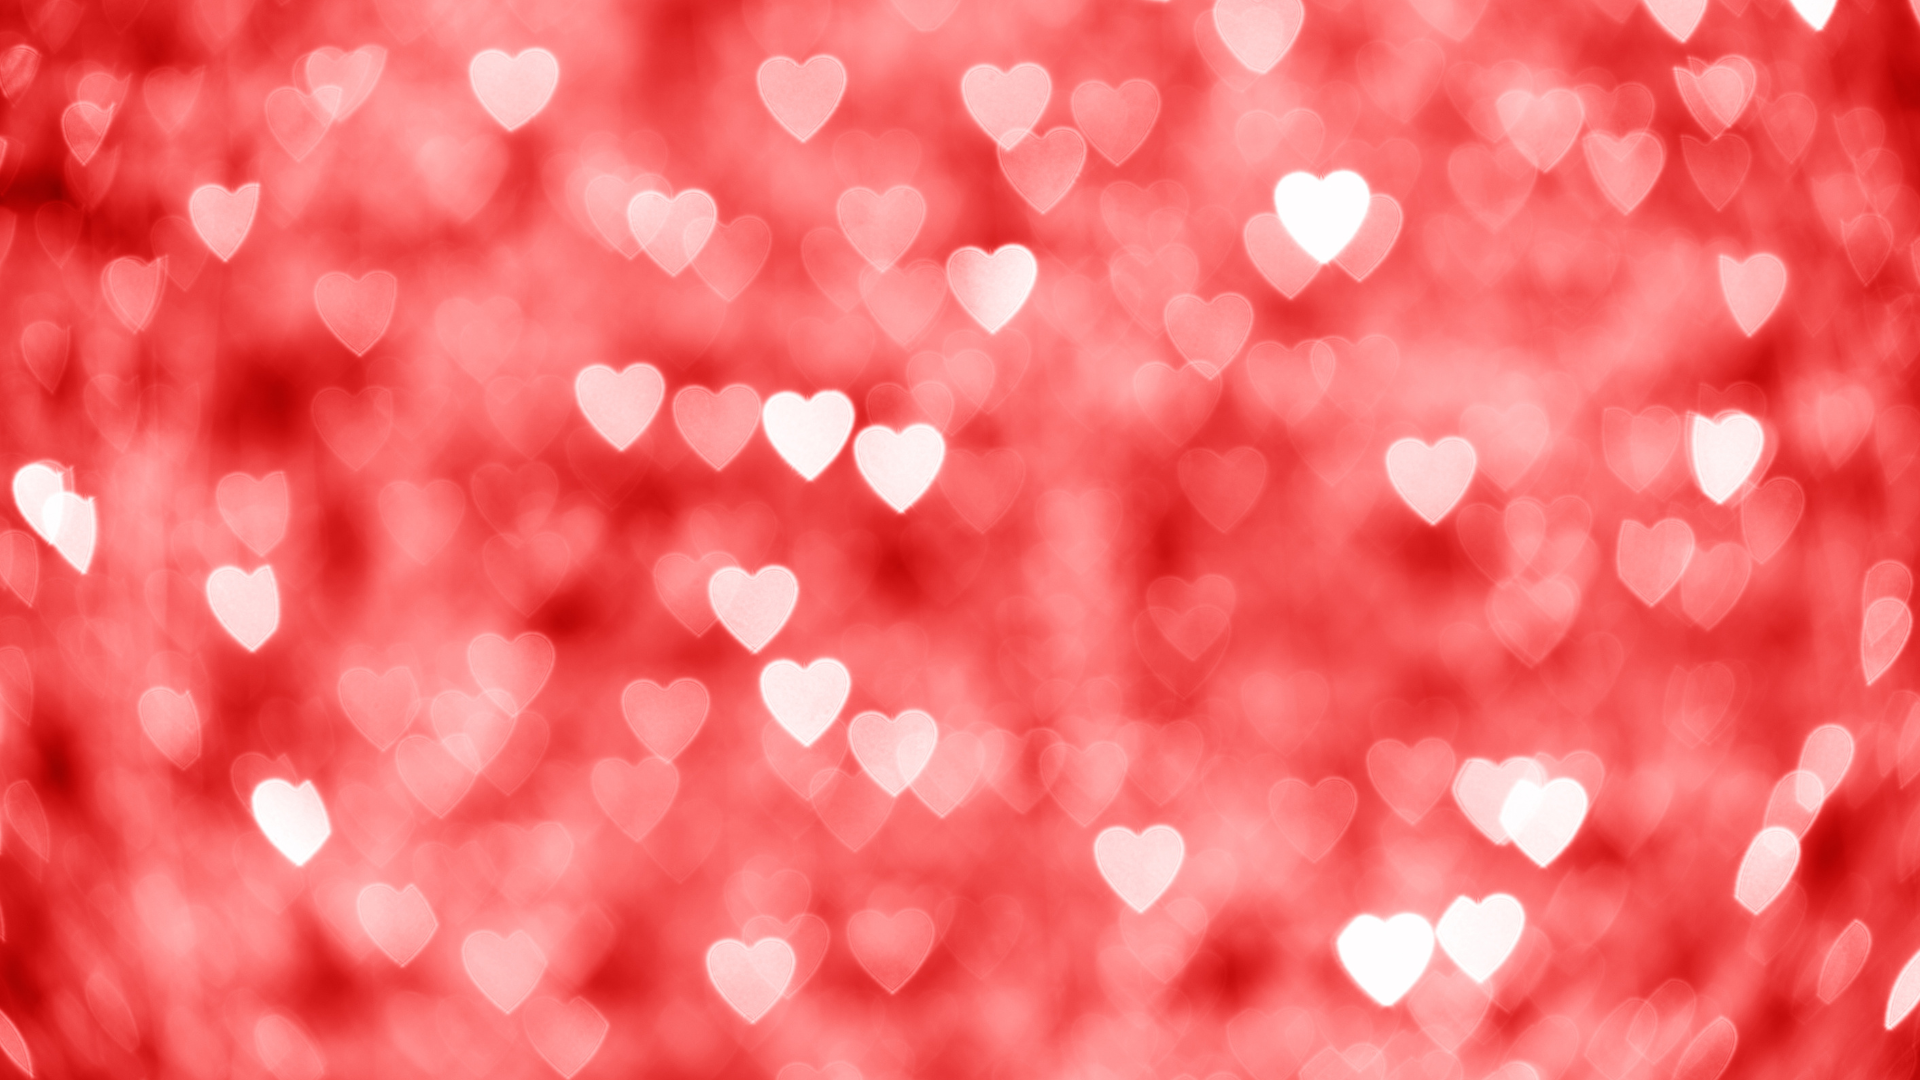 Feel the love of heart with this pretty background